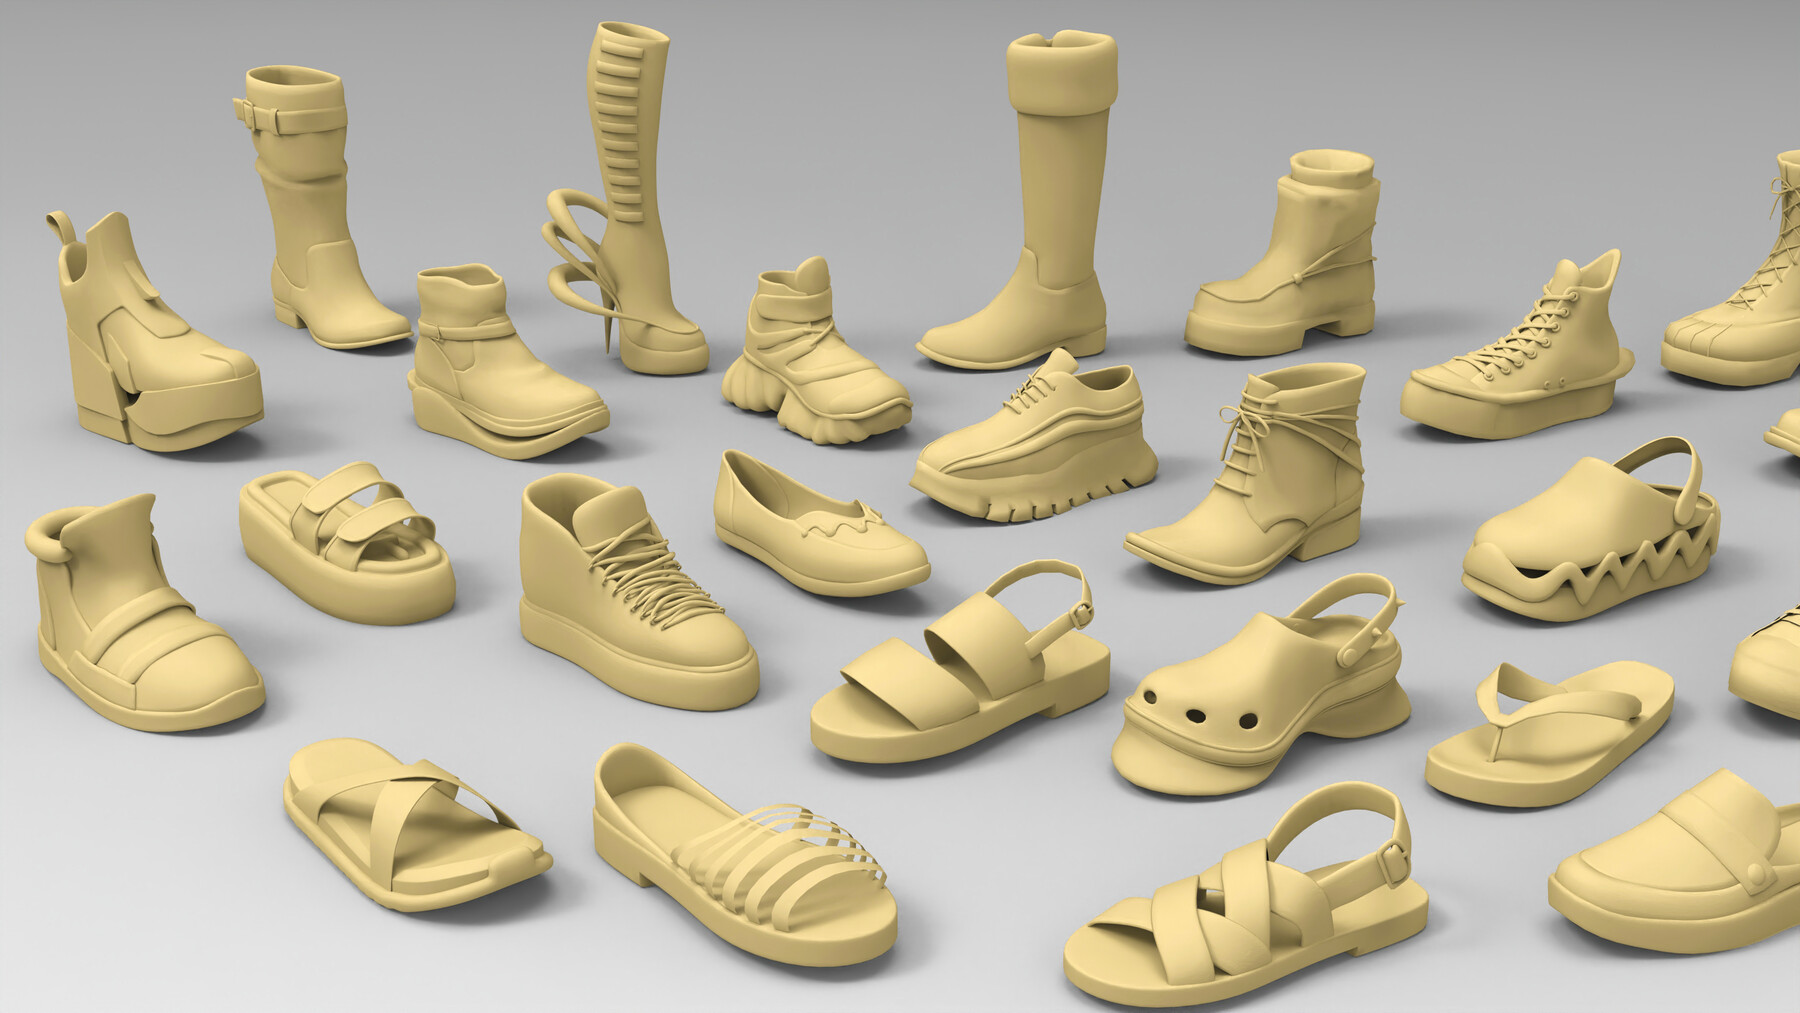 ArtStation - 25 basemesh shoes collection 3 | Resources